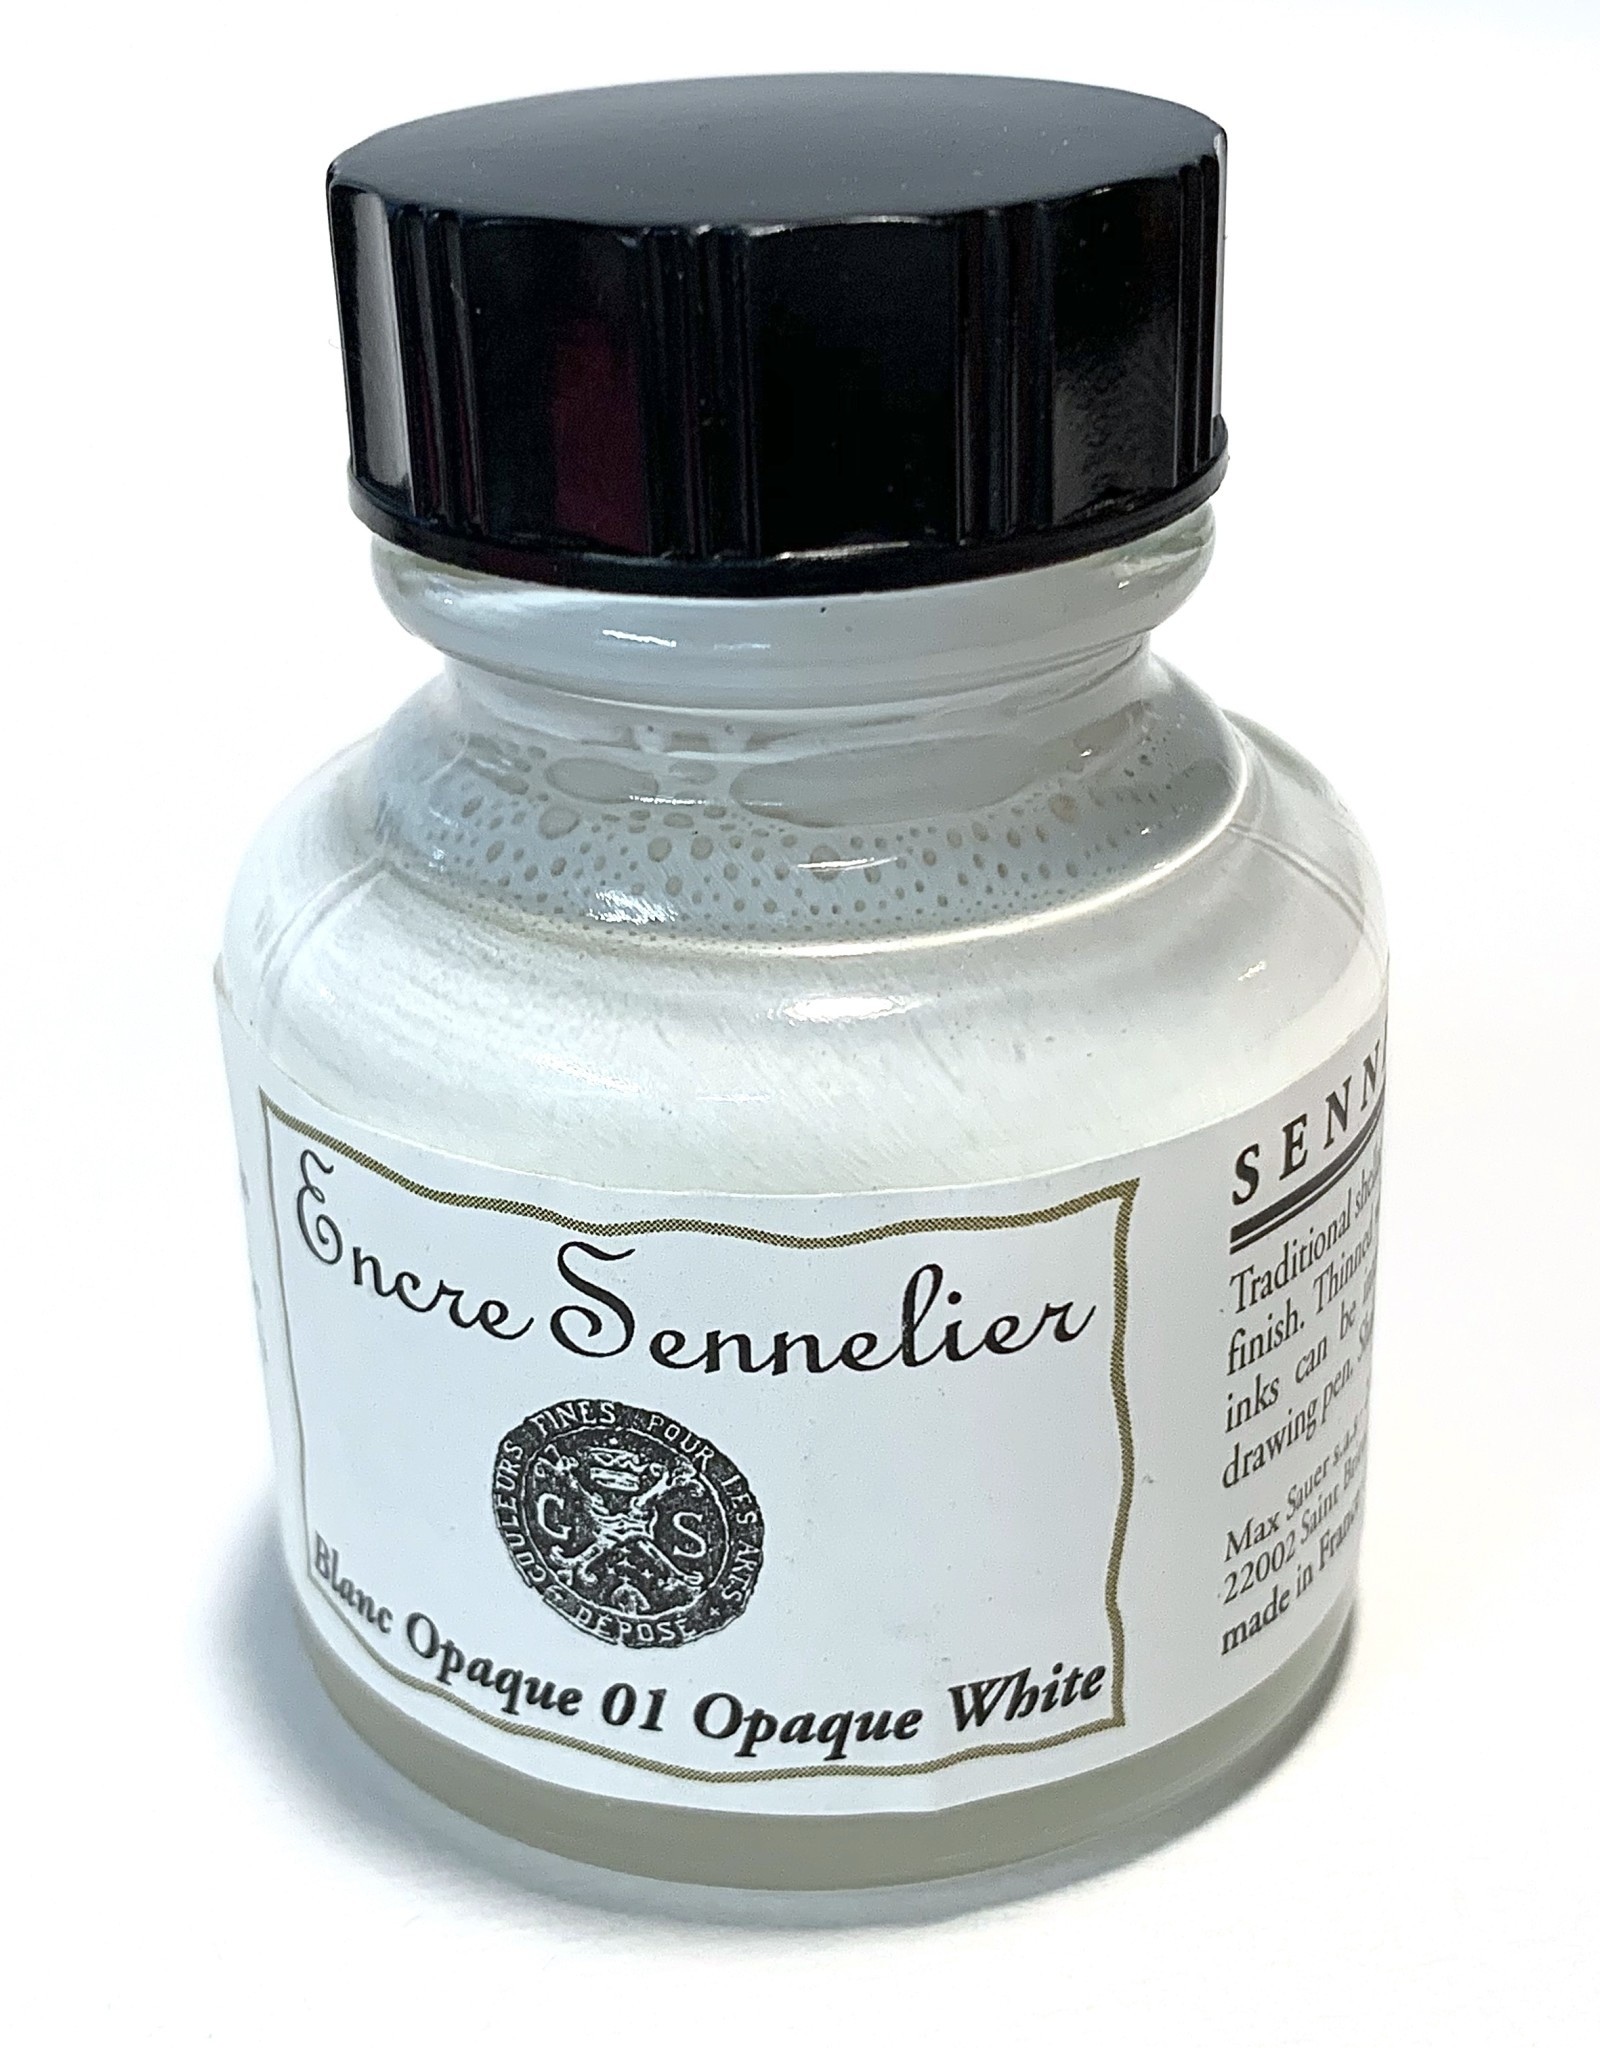 Sennelier Drawing Ink, Opaque White, Shellac Based, 30ml